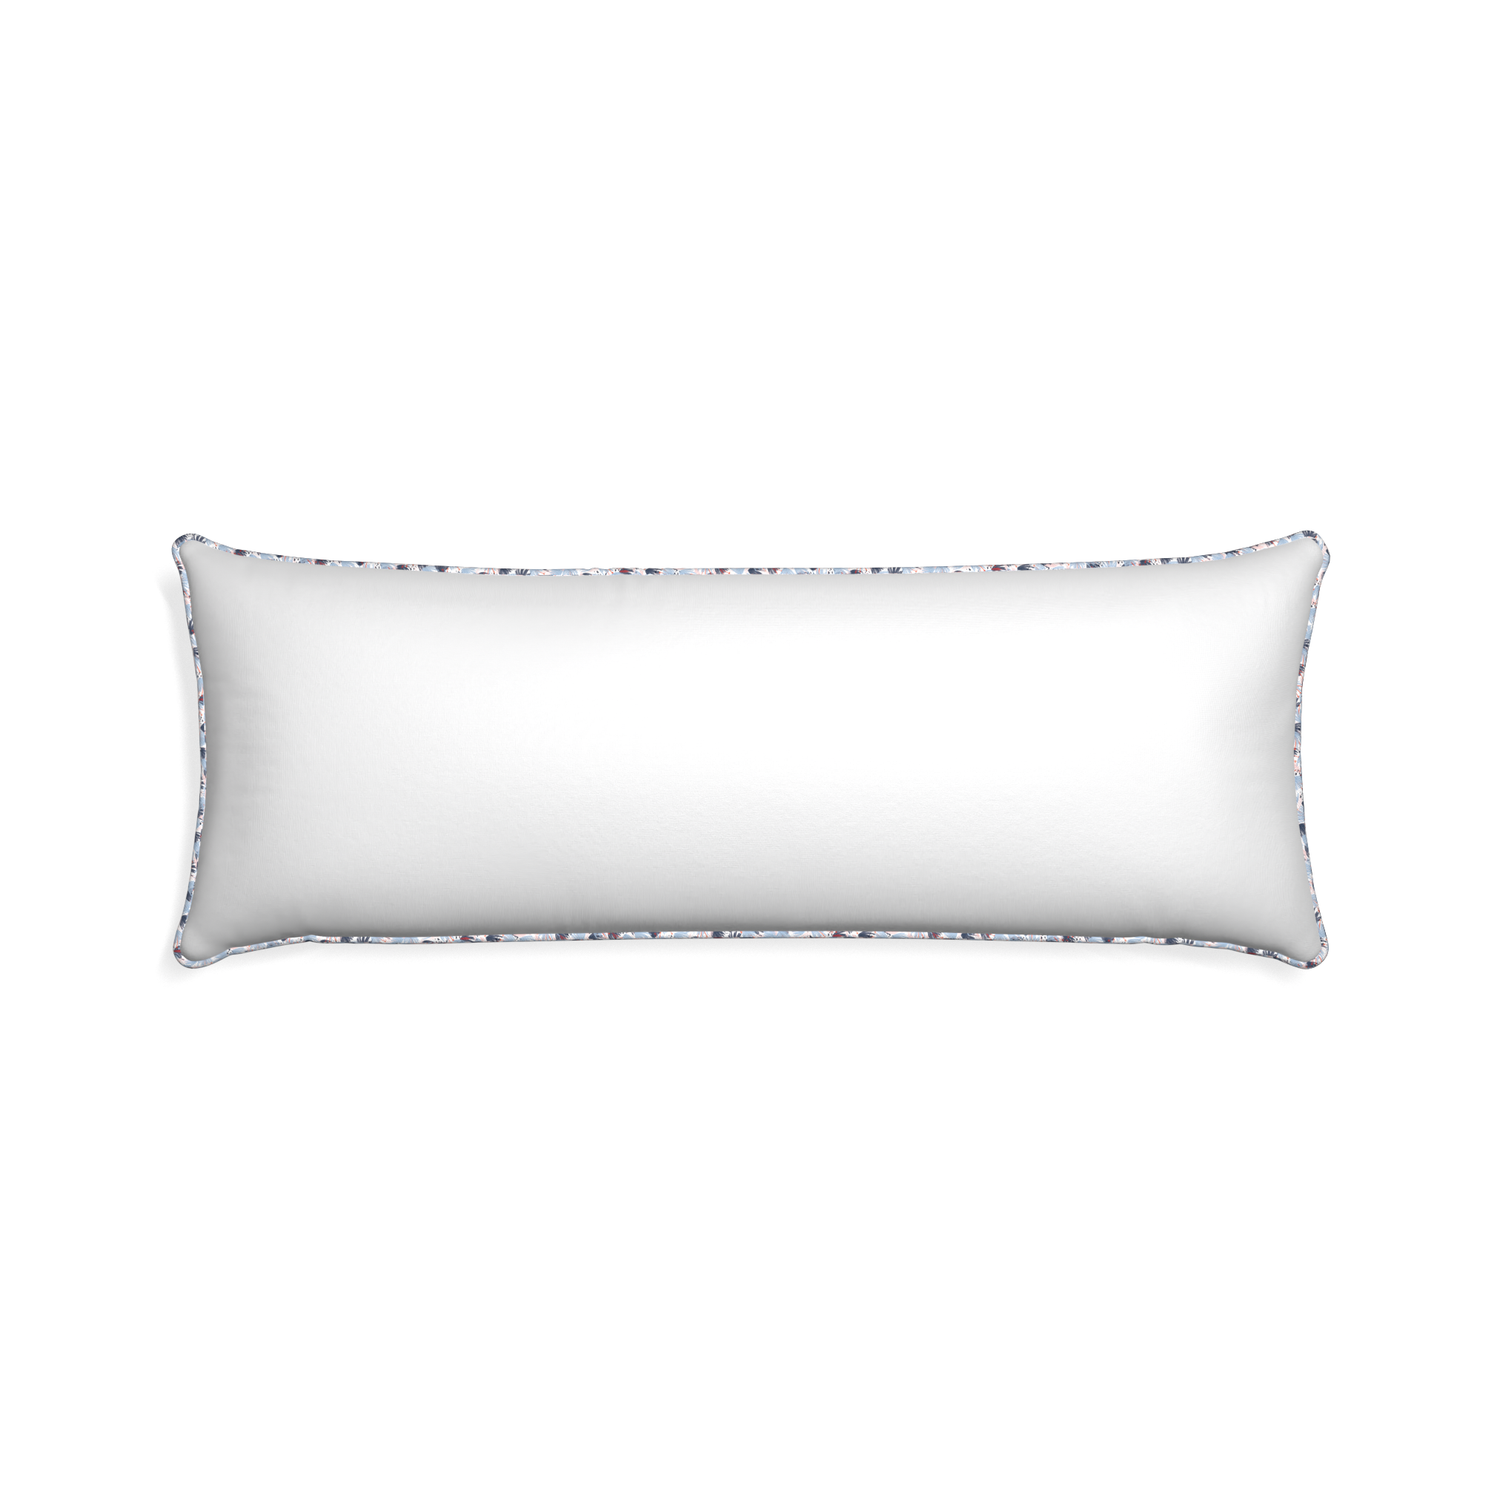 Xl-lumbar snow custom pillow with e piping on white background